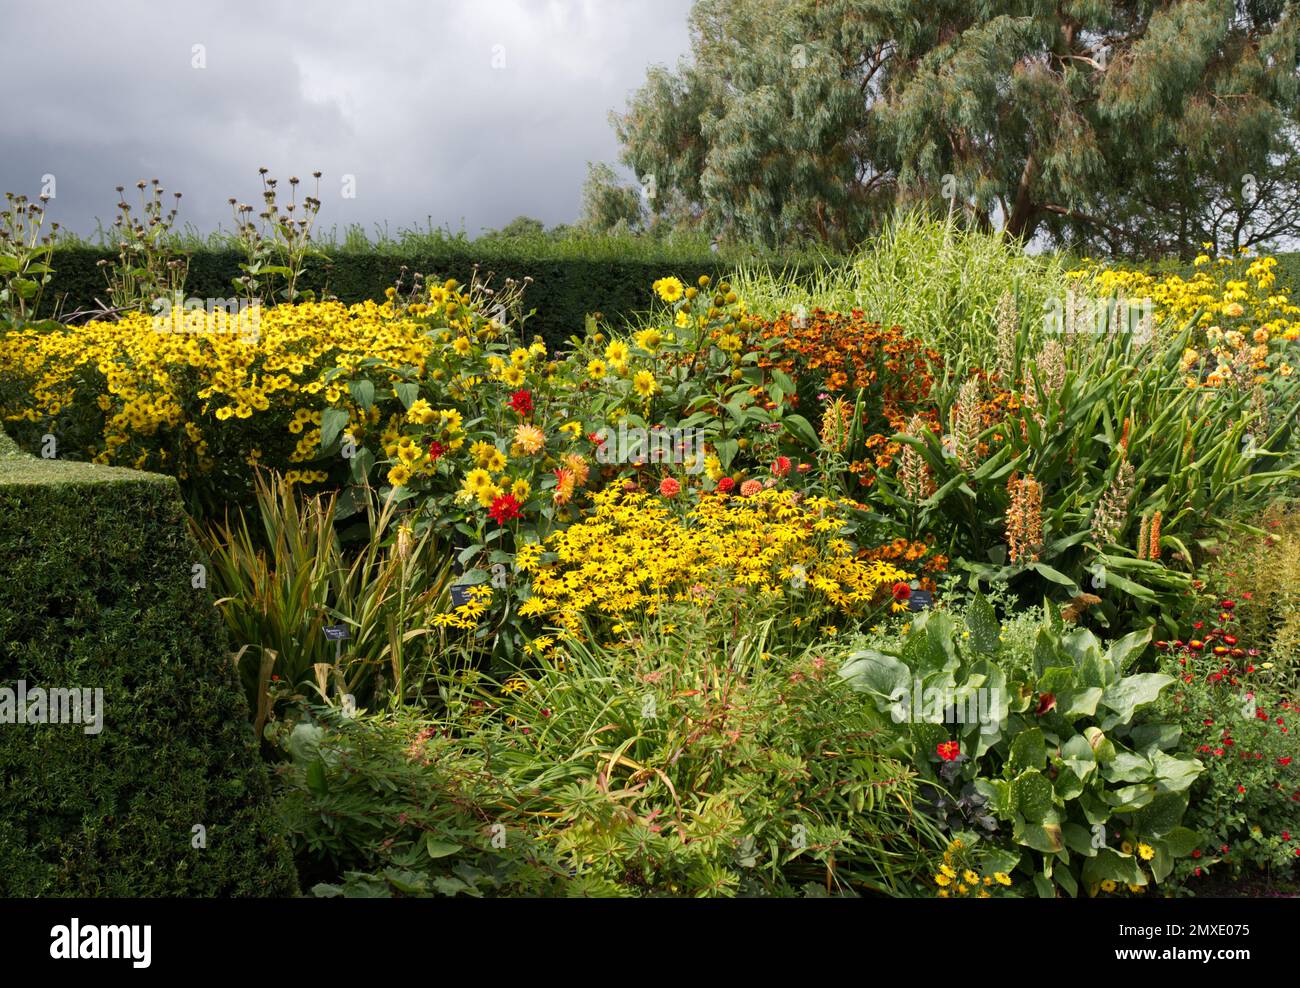 Hot and bright coloured border of herbaceous perennial flowers, protected by clipped yew hedges at RHS garden Hyde Hall UK September Stock Photo